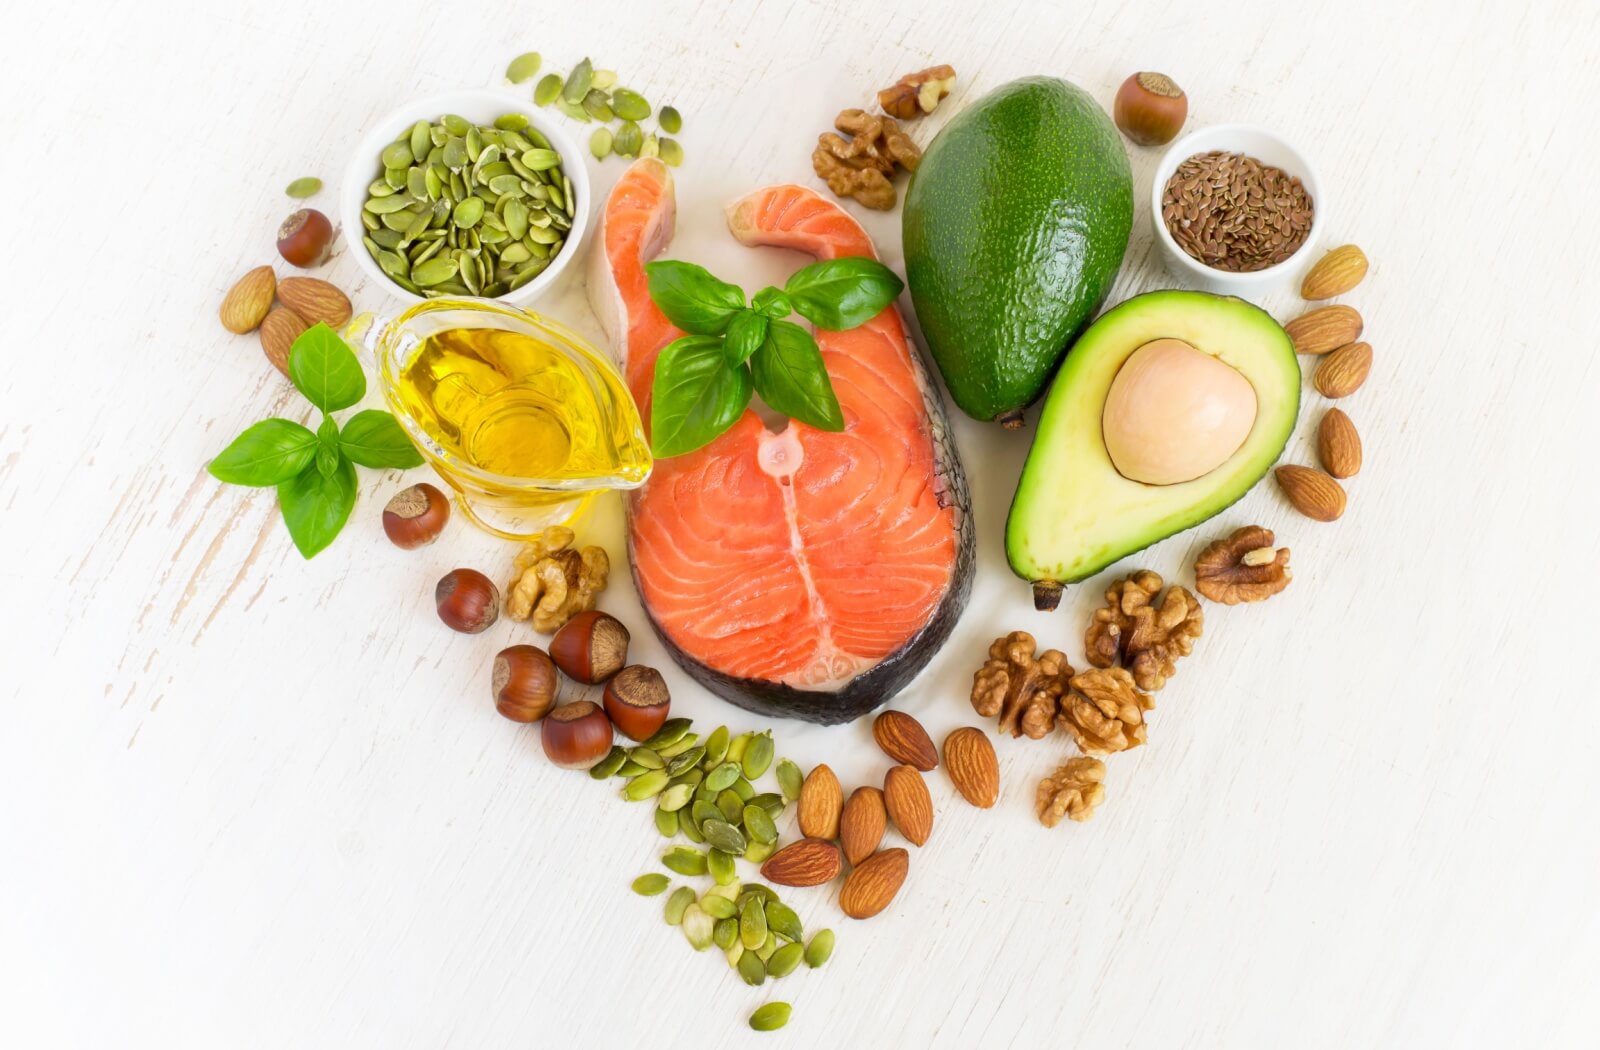 An assortment of foods rich in Omega-3 arranged in the shape of a heart.